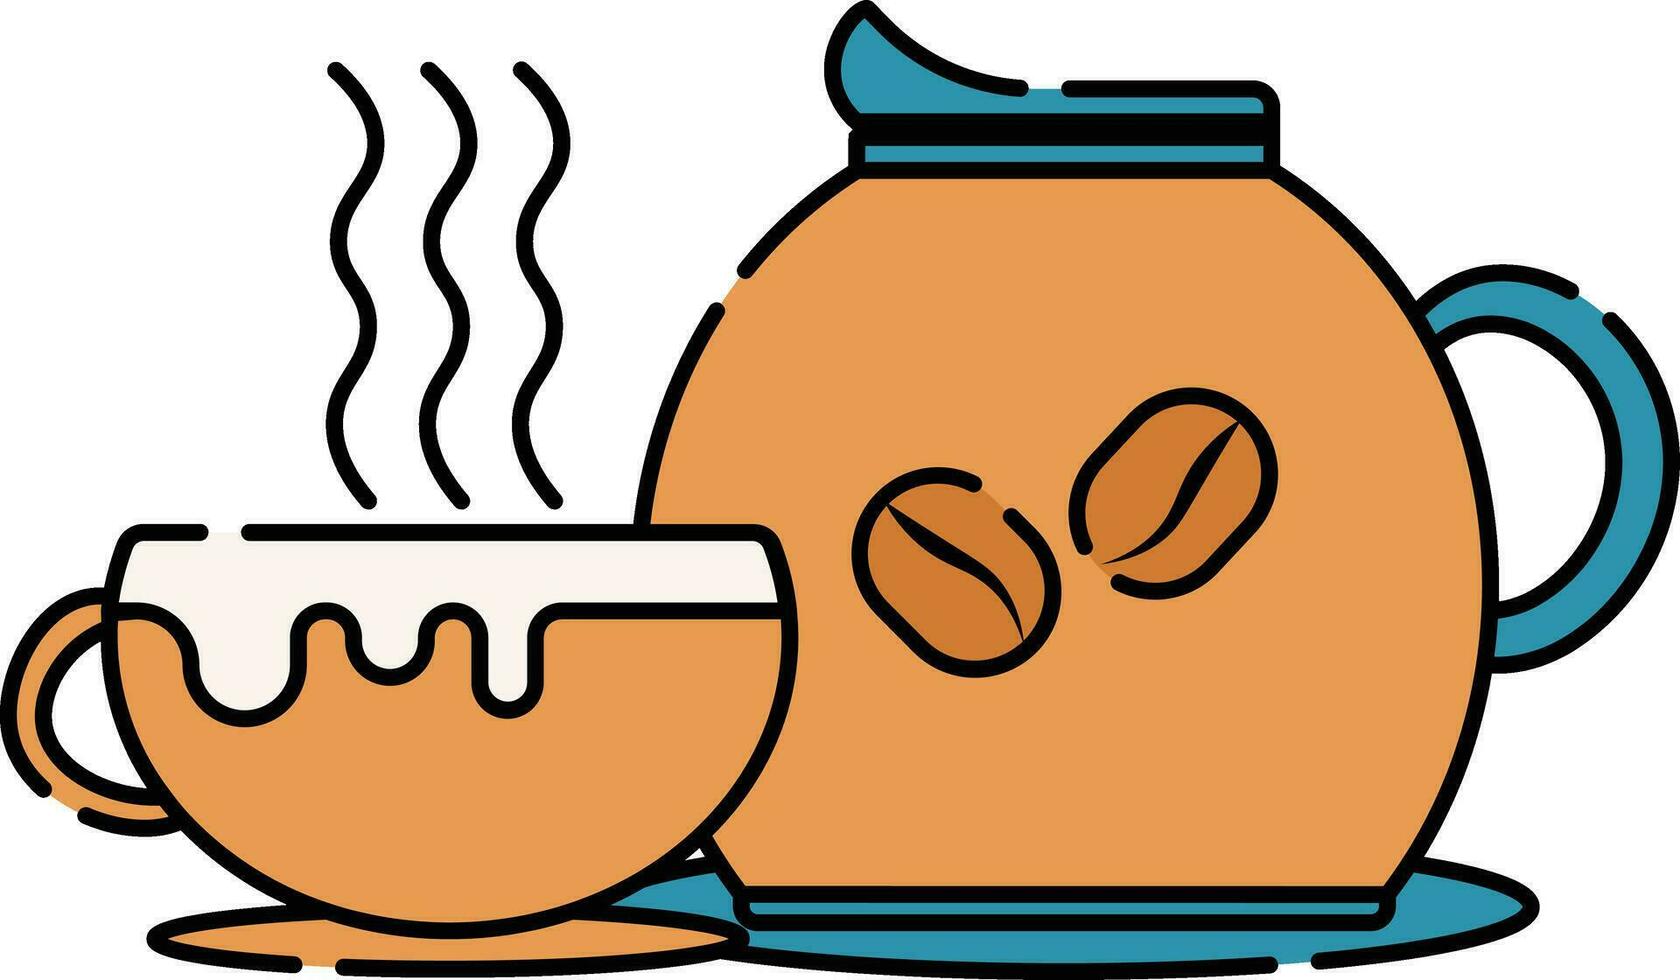 coffee cup and teapot icon over white background vector illustration